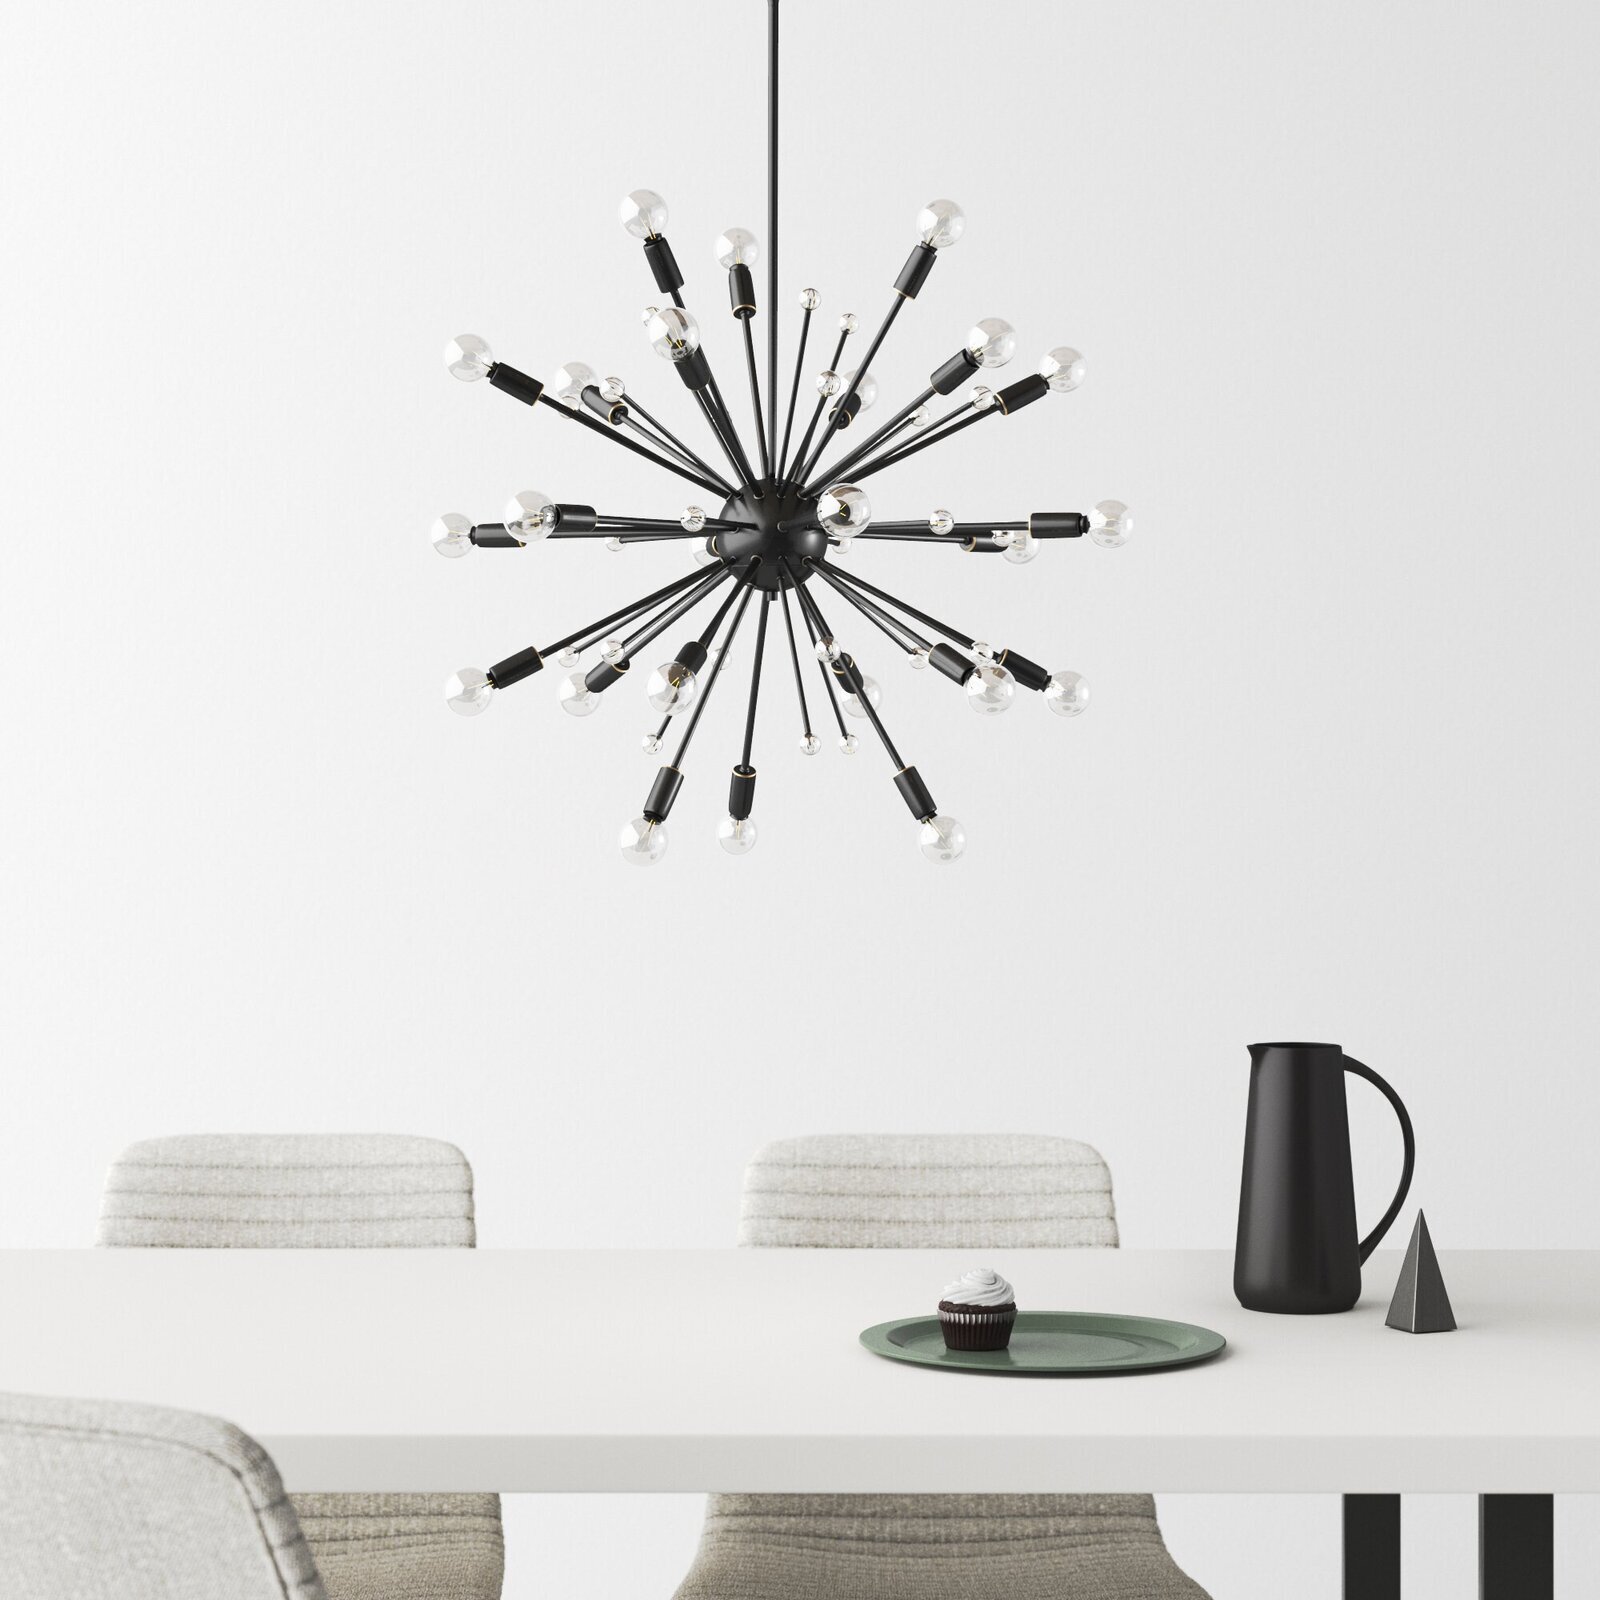 The trendy starburst adjustable and retractable pendant light